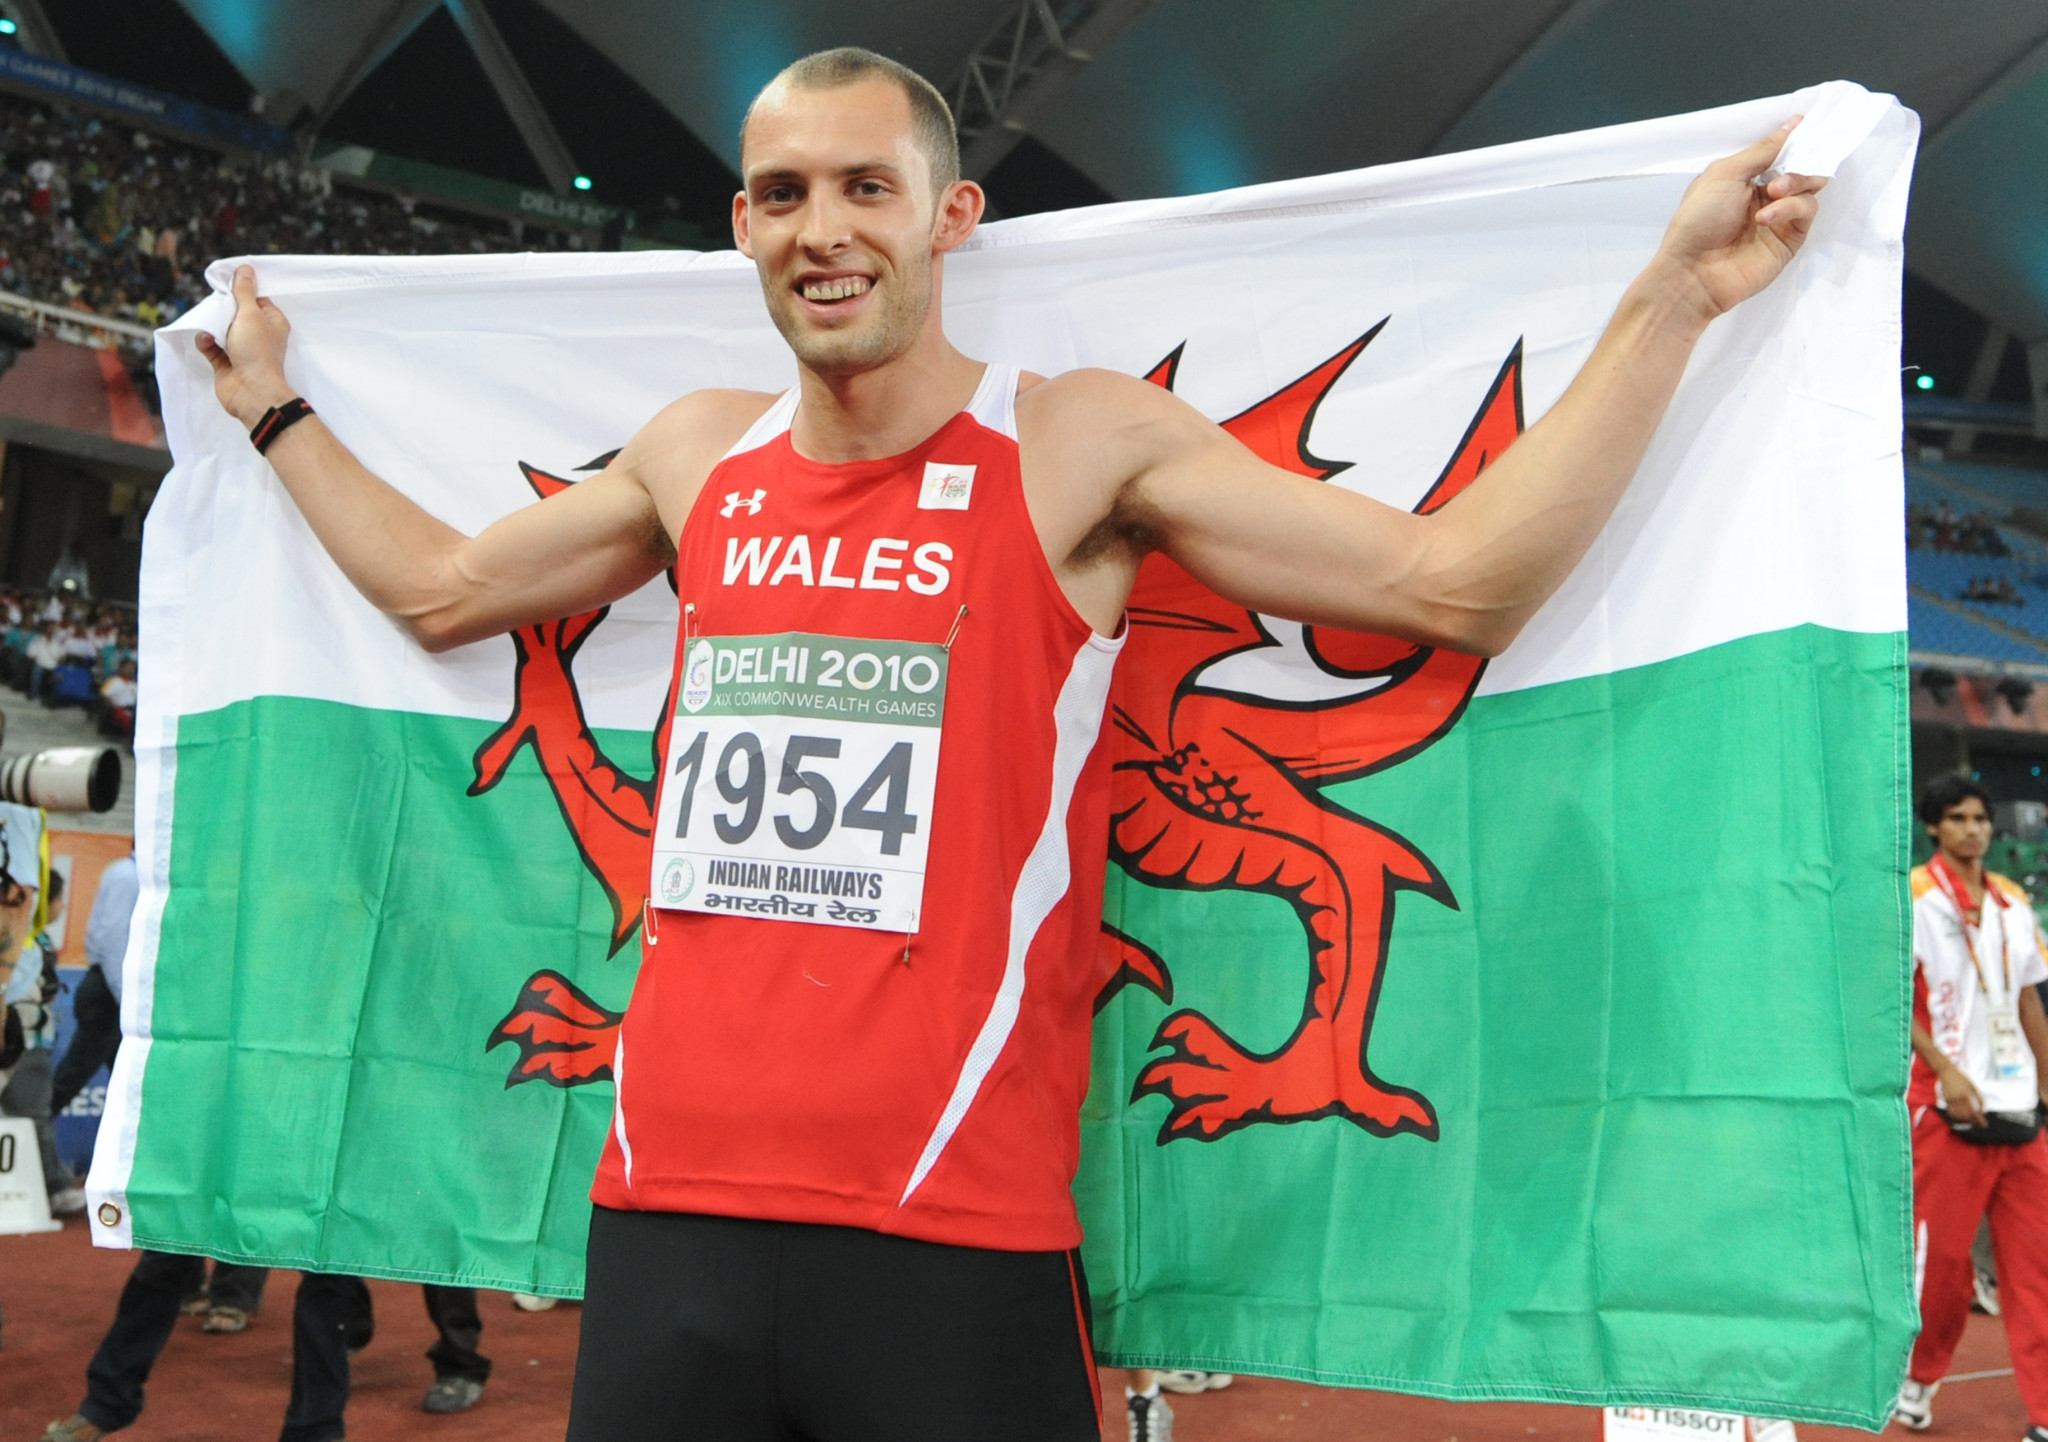 Greene selected for Welsh team at Gold Coast 2018 after returning to form